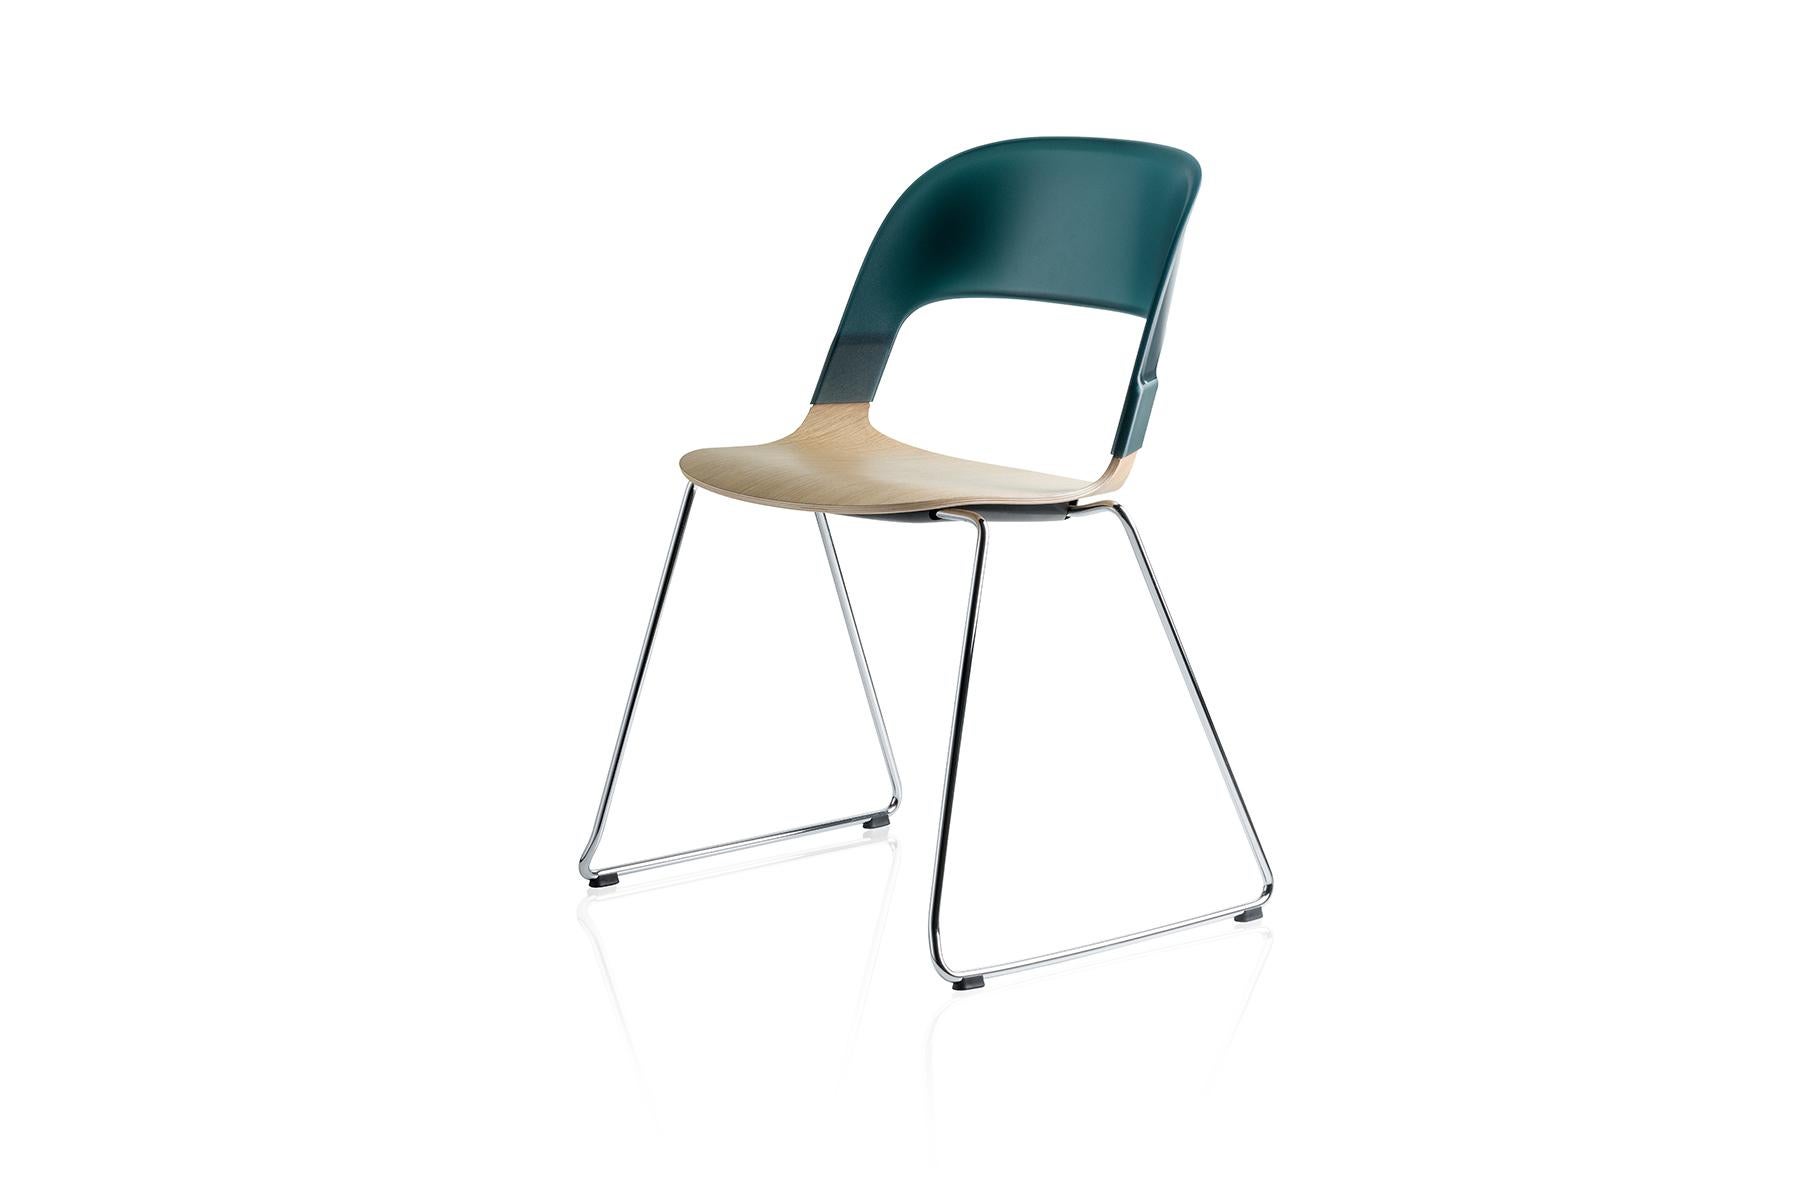 With Pair by Benjamin Hubert we present a unique design paired with unlimited possibilities. Pair is a stacking chair and comes in a mix of veneer and plastic that differentiates it from the existing stackable chairs in our collection. Pair is the